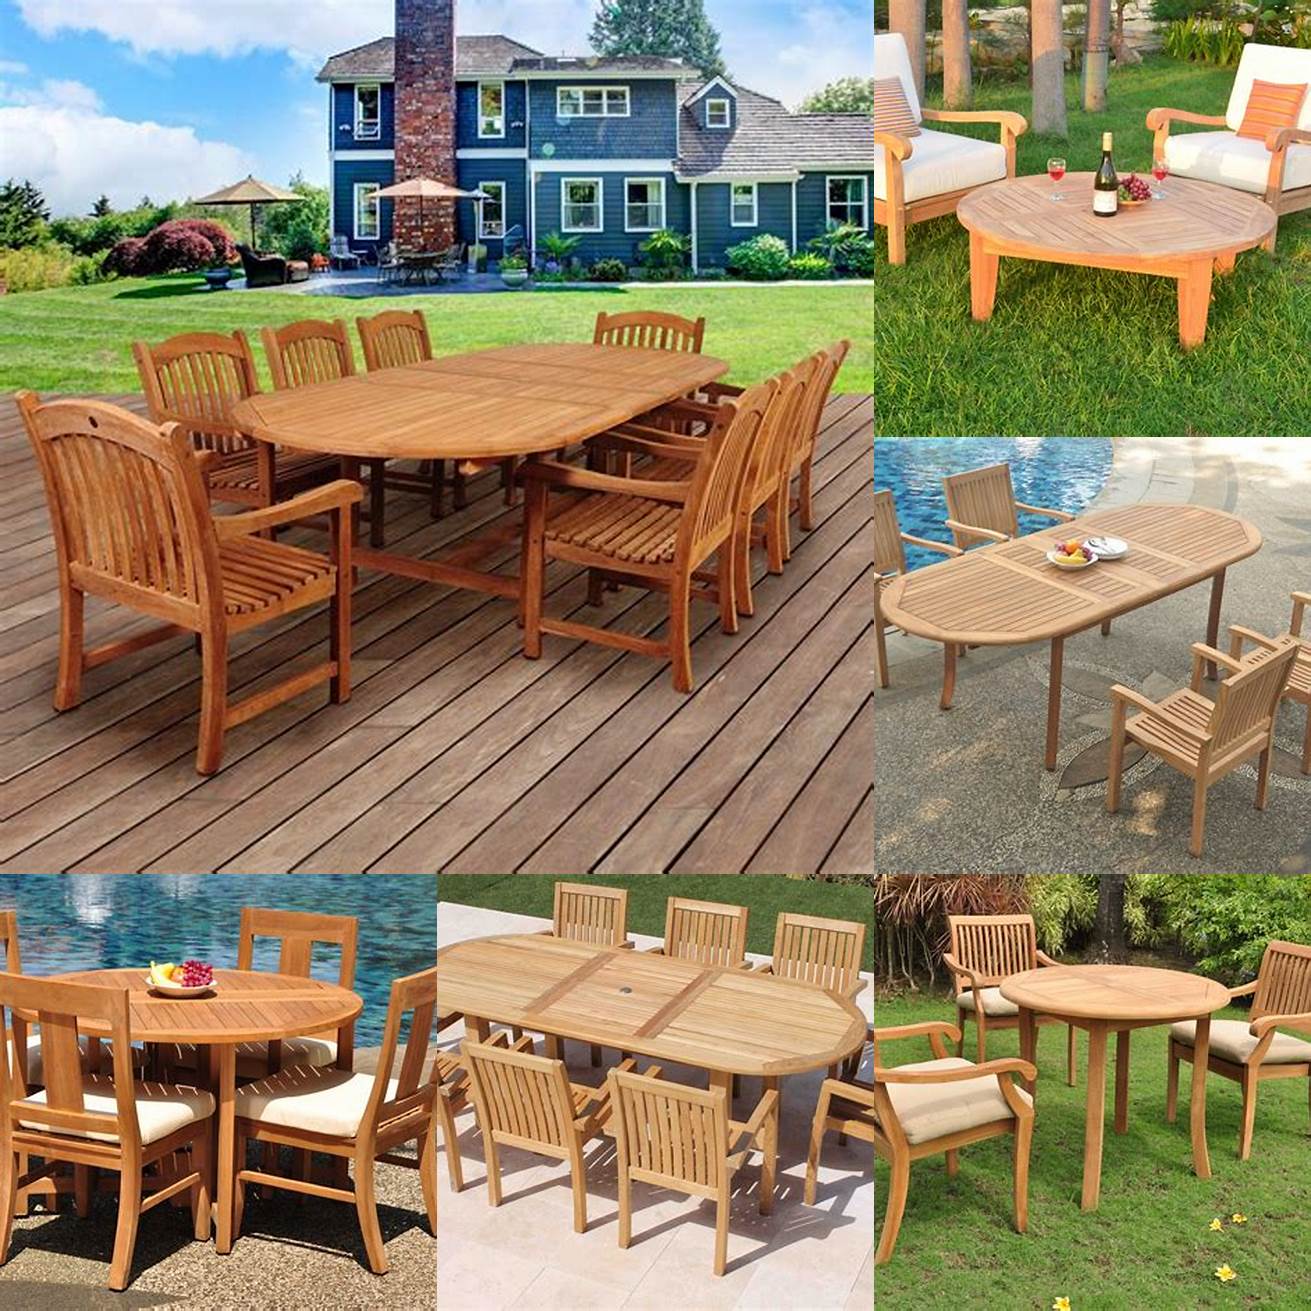 Discounts and Deals on Teak Furniture